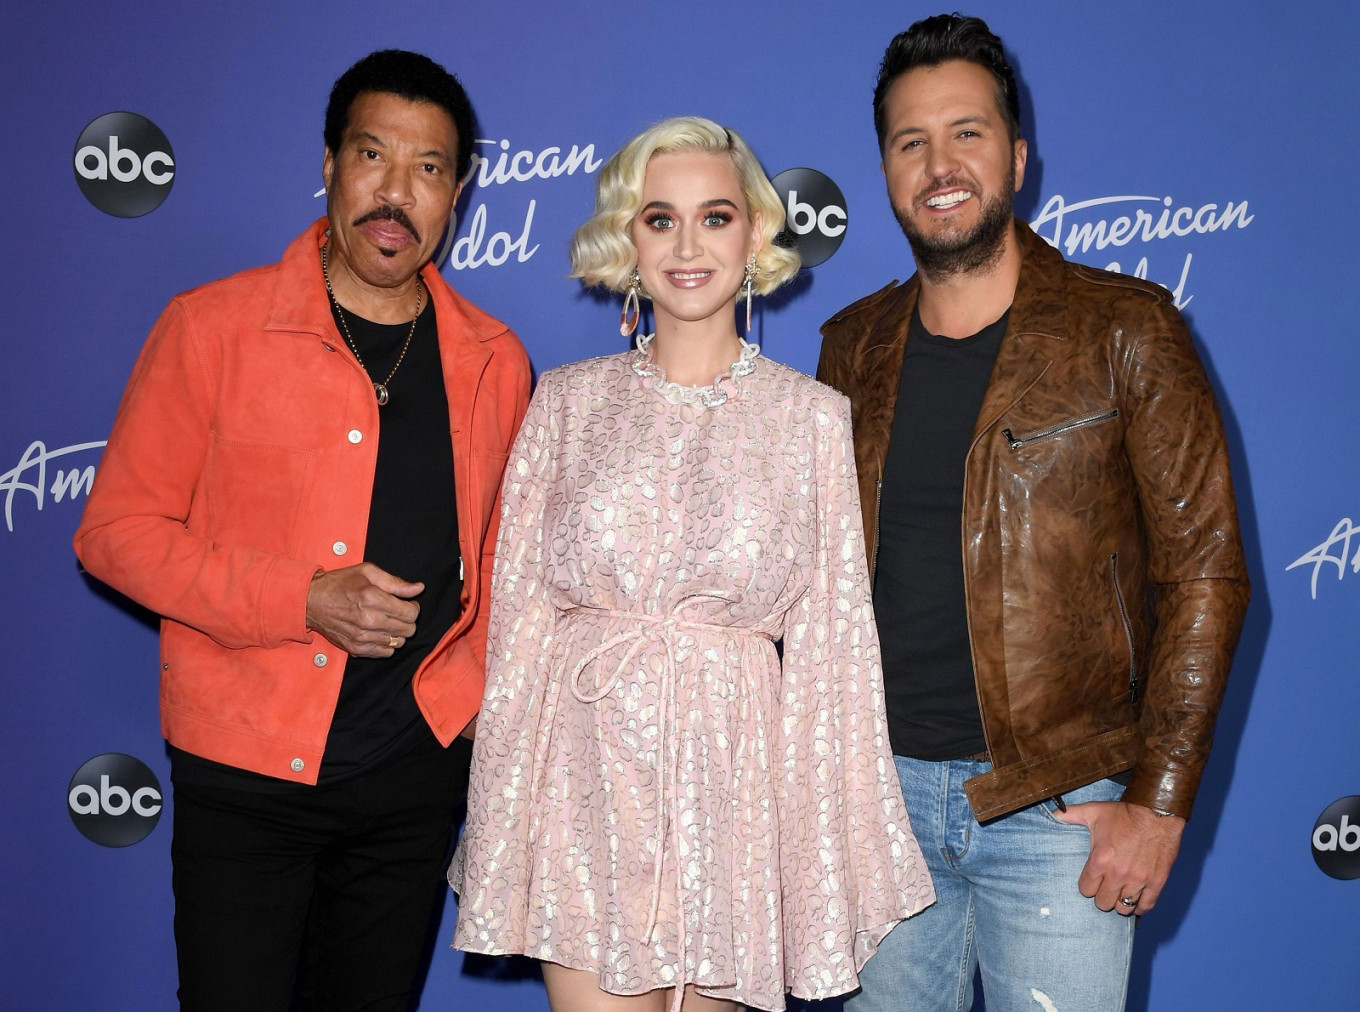 We Are The World' to get an 'American Idol' alumni encore - Entertainment -  The Jakarta Post